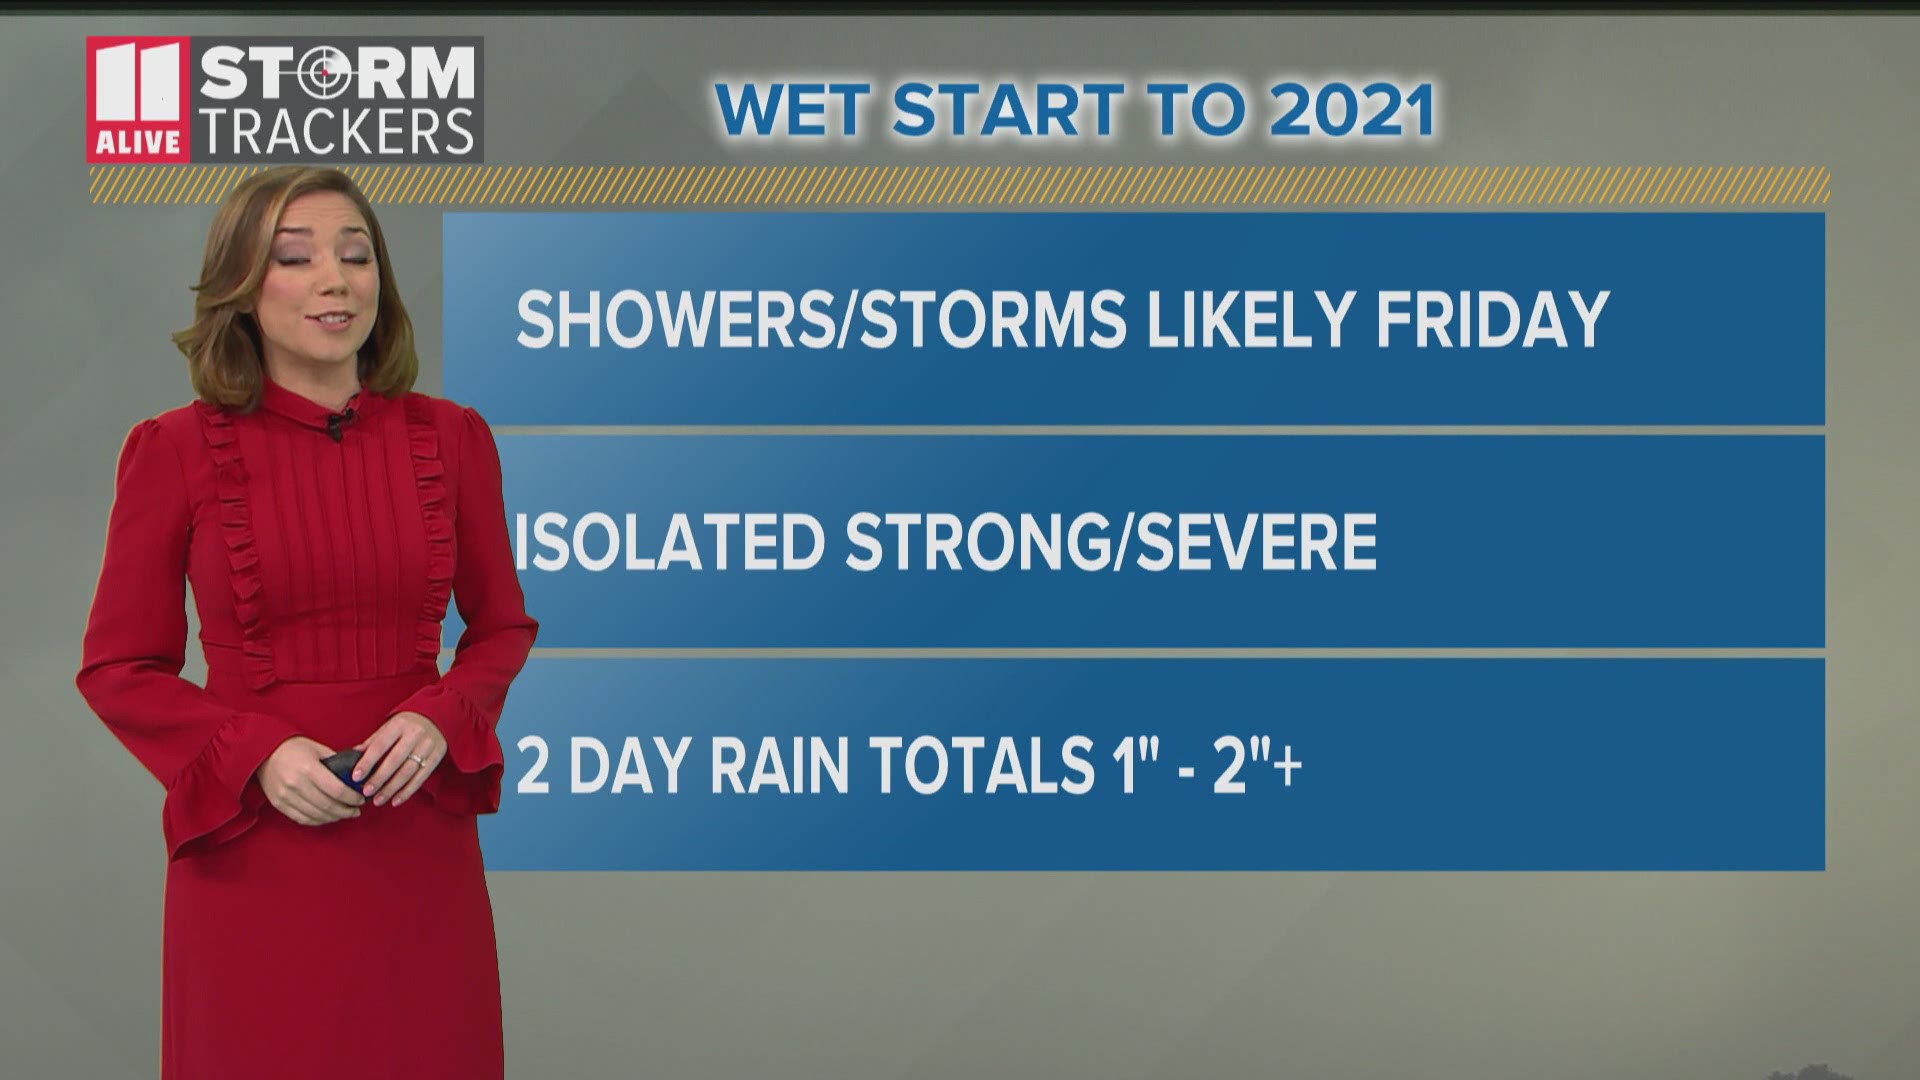 Thunderstorms are likely Friday, and a few could become strong to severe